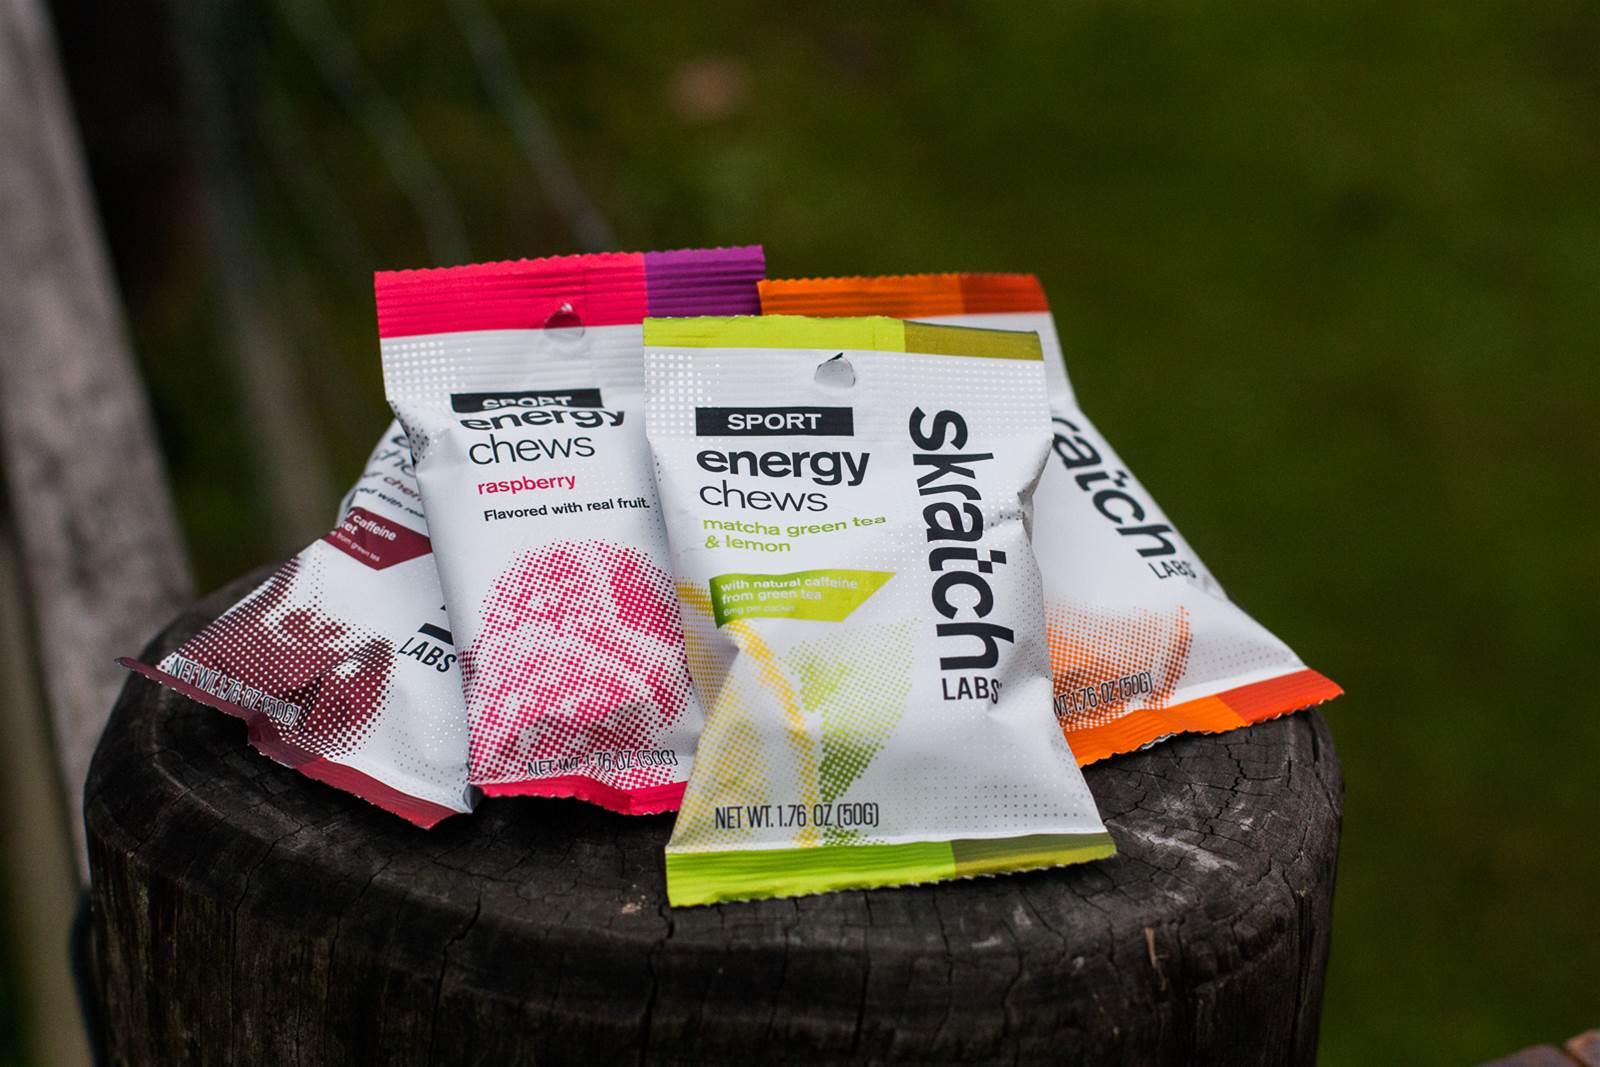 TESTED: Skratch Labs nutrition on the trails